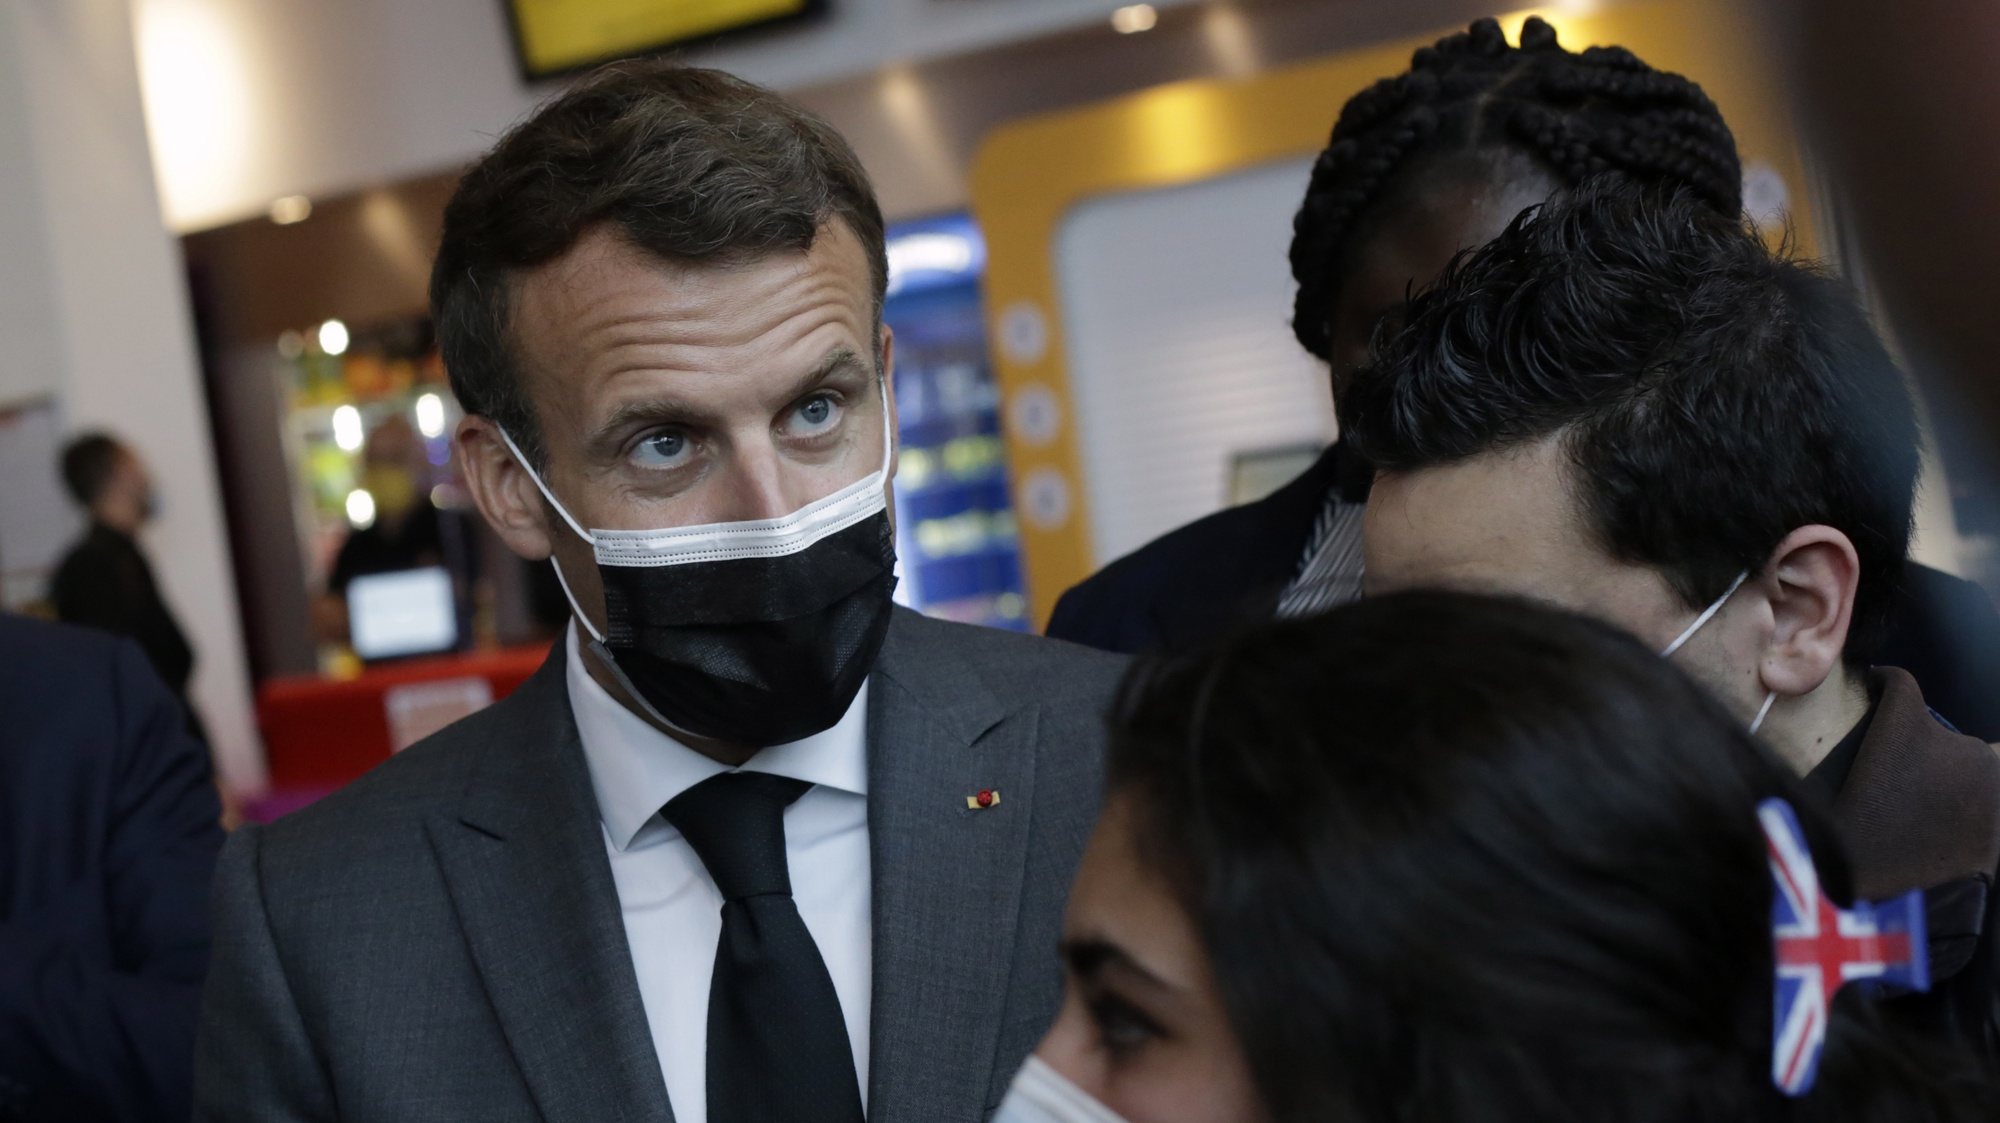 epa09217953 French President Emmanuel Macron, speaks with youths at Mazarin cinema during a visit to mark the reopening of cultural activities after closures during the Covid-19 pandemic, in Nevers, central France, 21 May 2021.  EPA/THIBAULT CAMUS / POOL  MAXPPP OUT